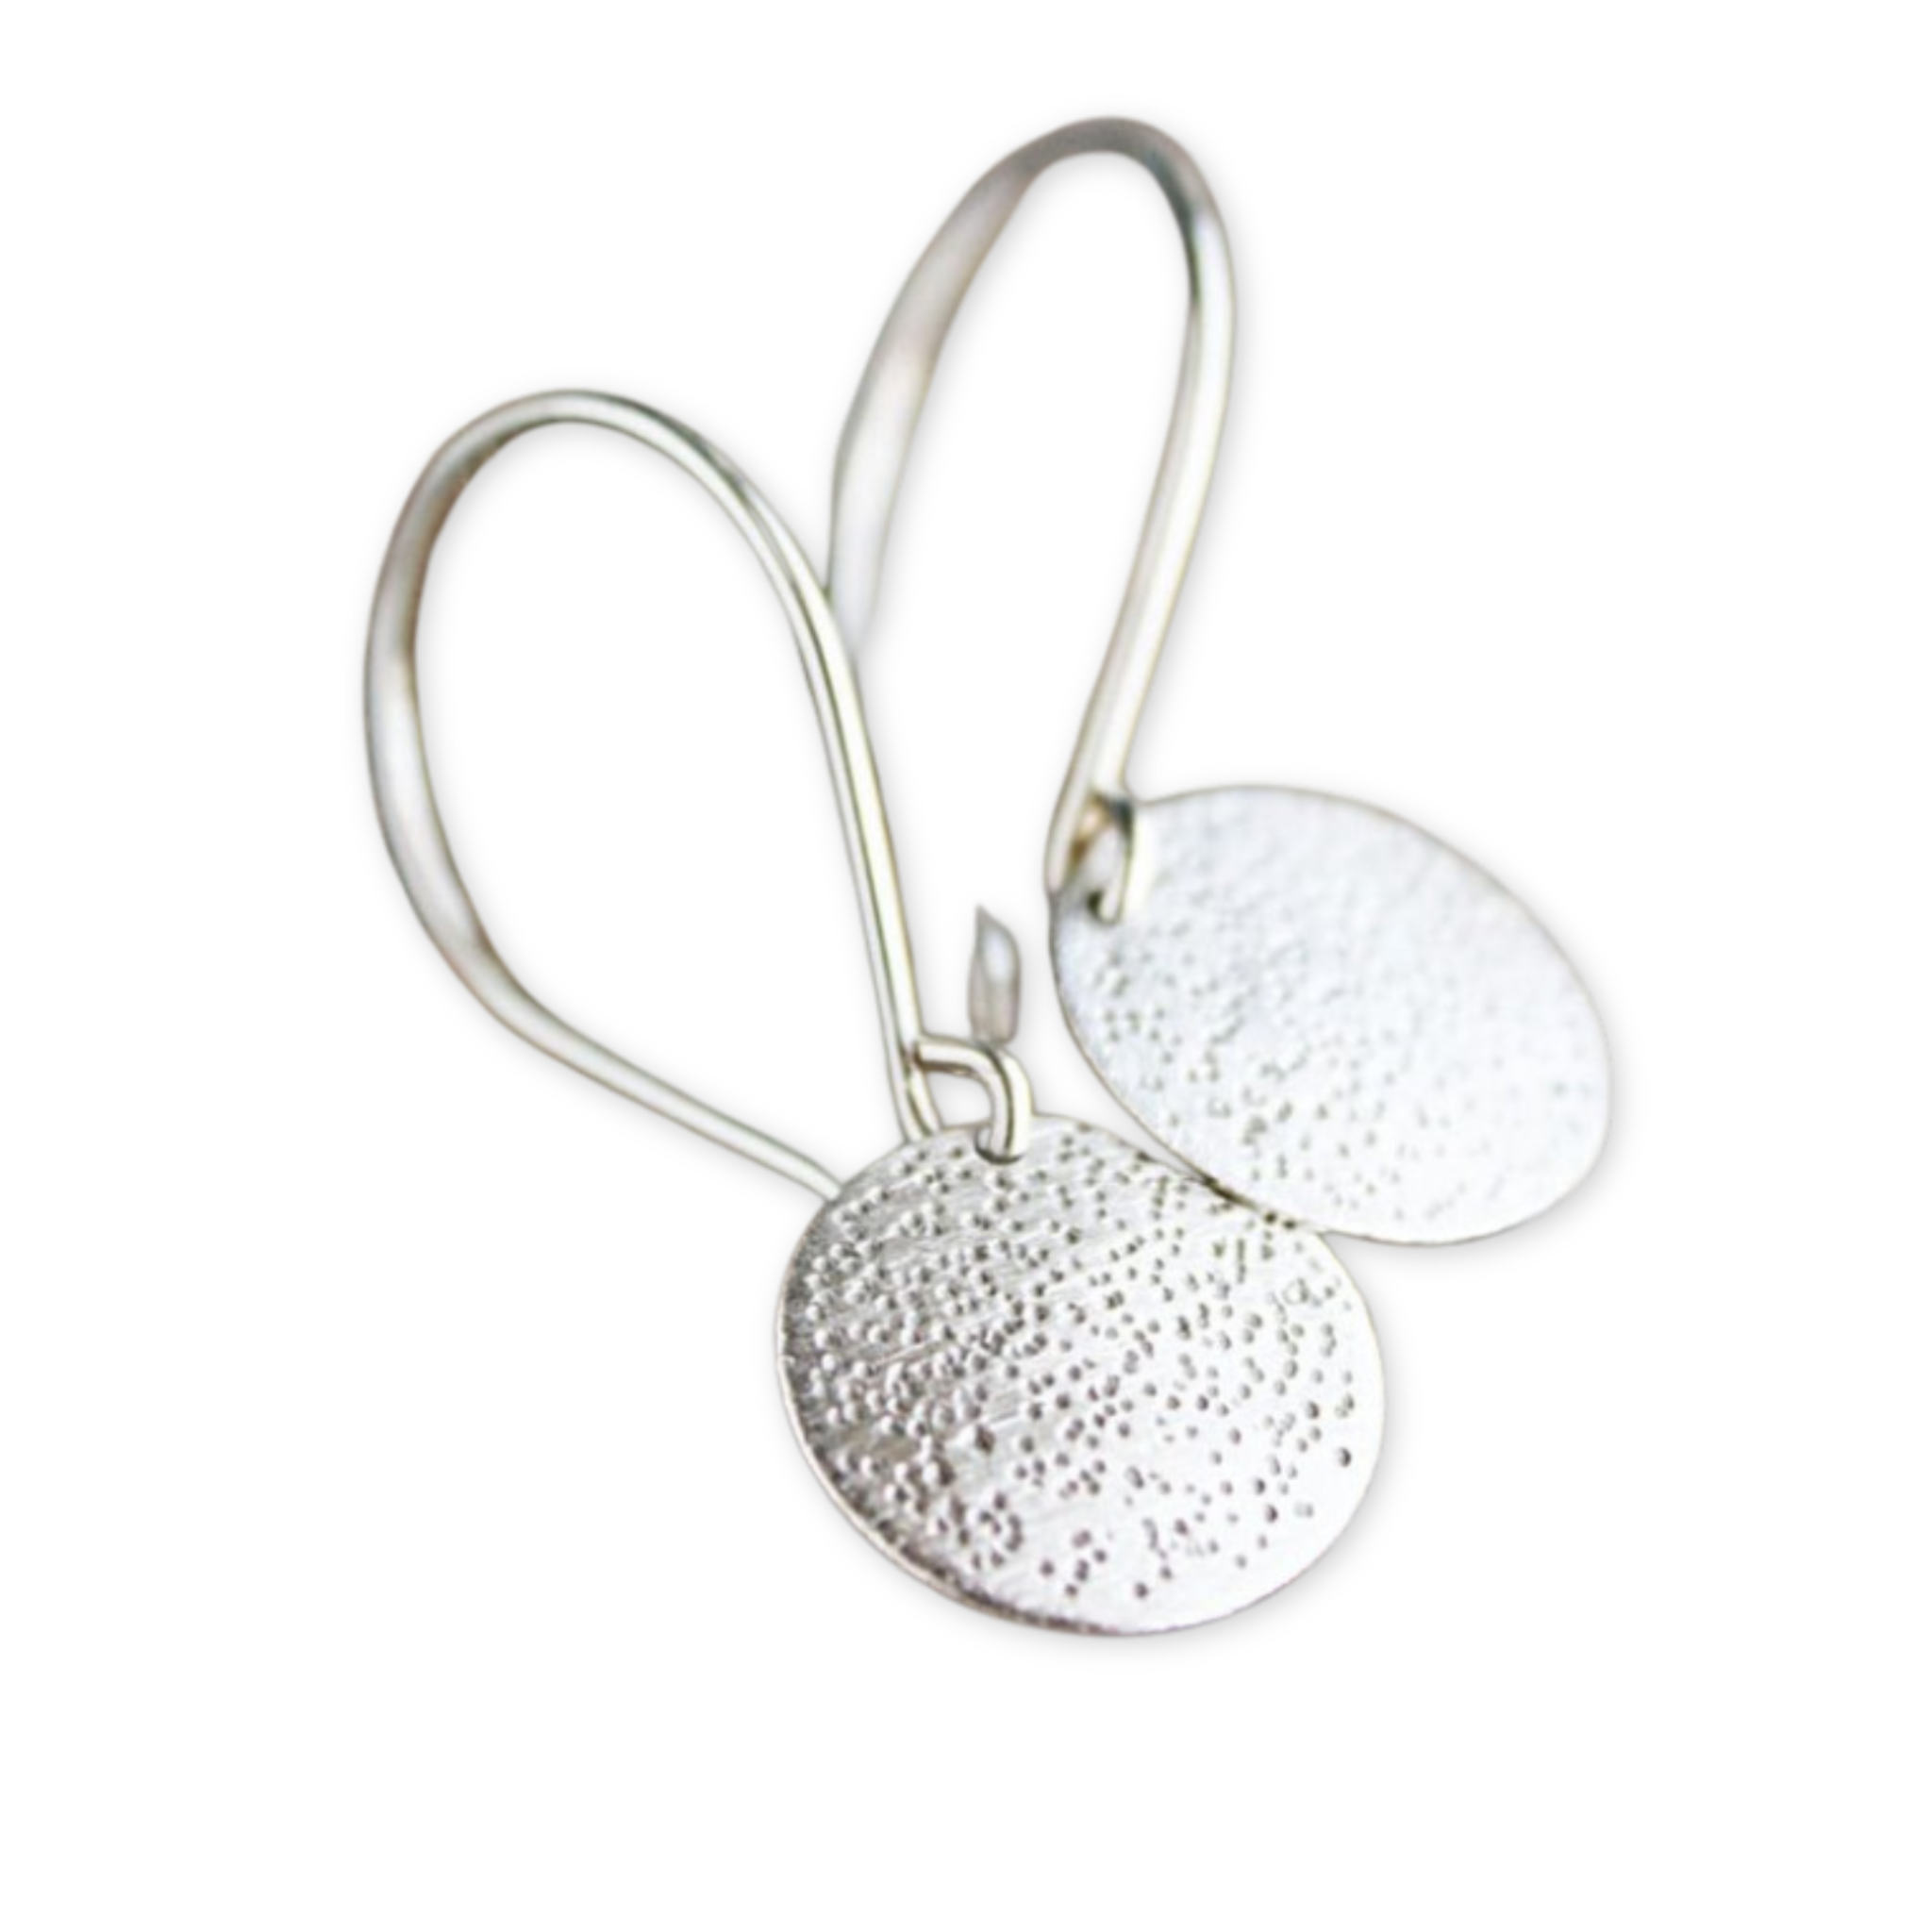 silver earrings with speckled round discs